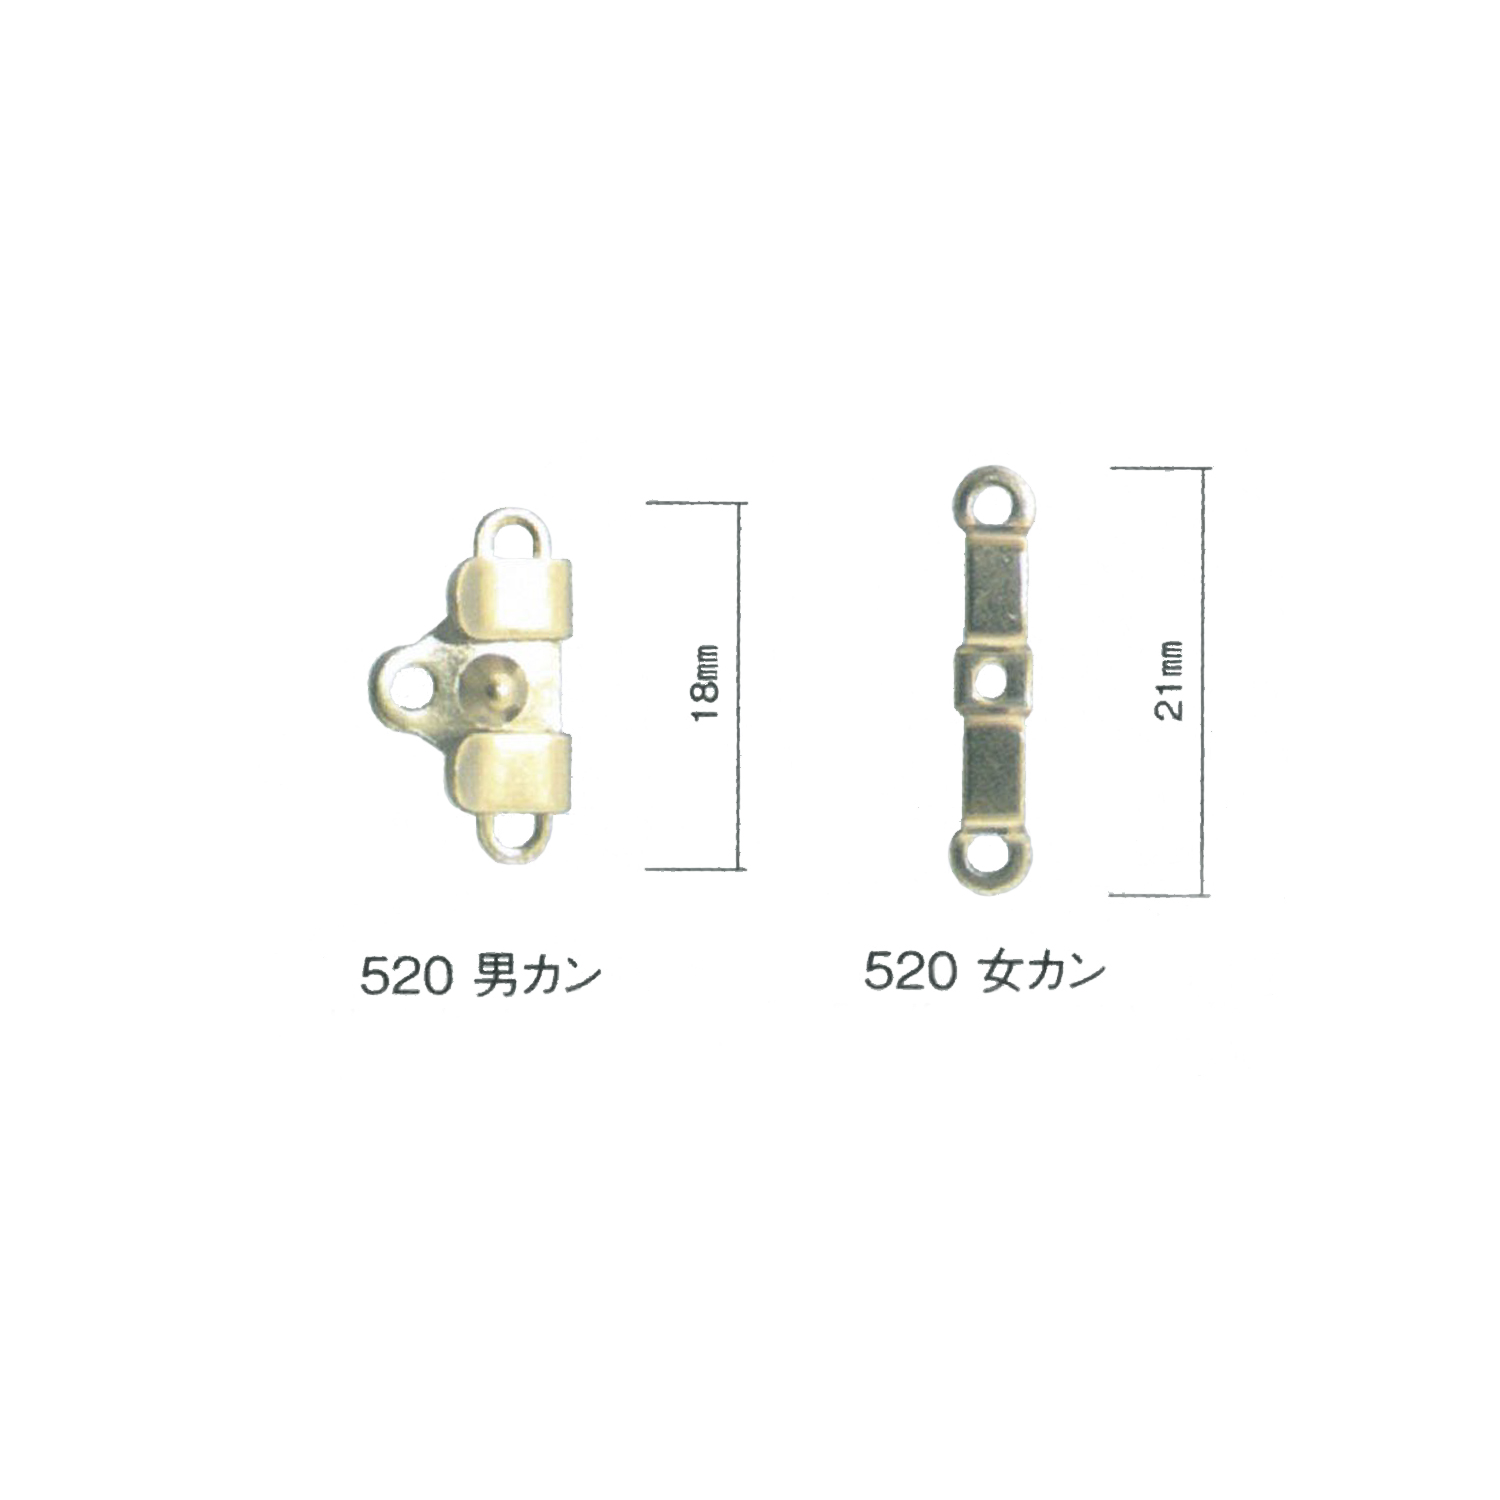 520K Front Hook (Hook And Eye Closure) * Needle Detector Compatible And  With Sewing Machine Morito/Okura Shoji Co., Ltd. - ApparelX